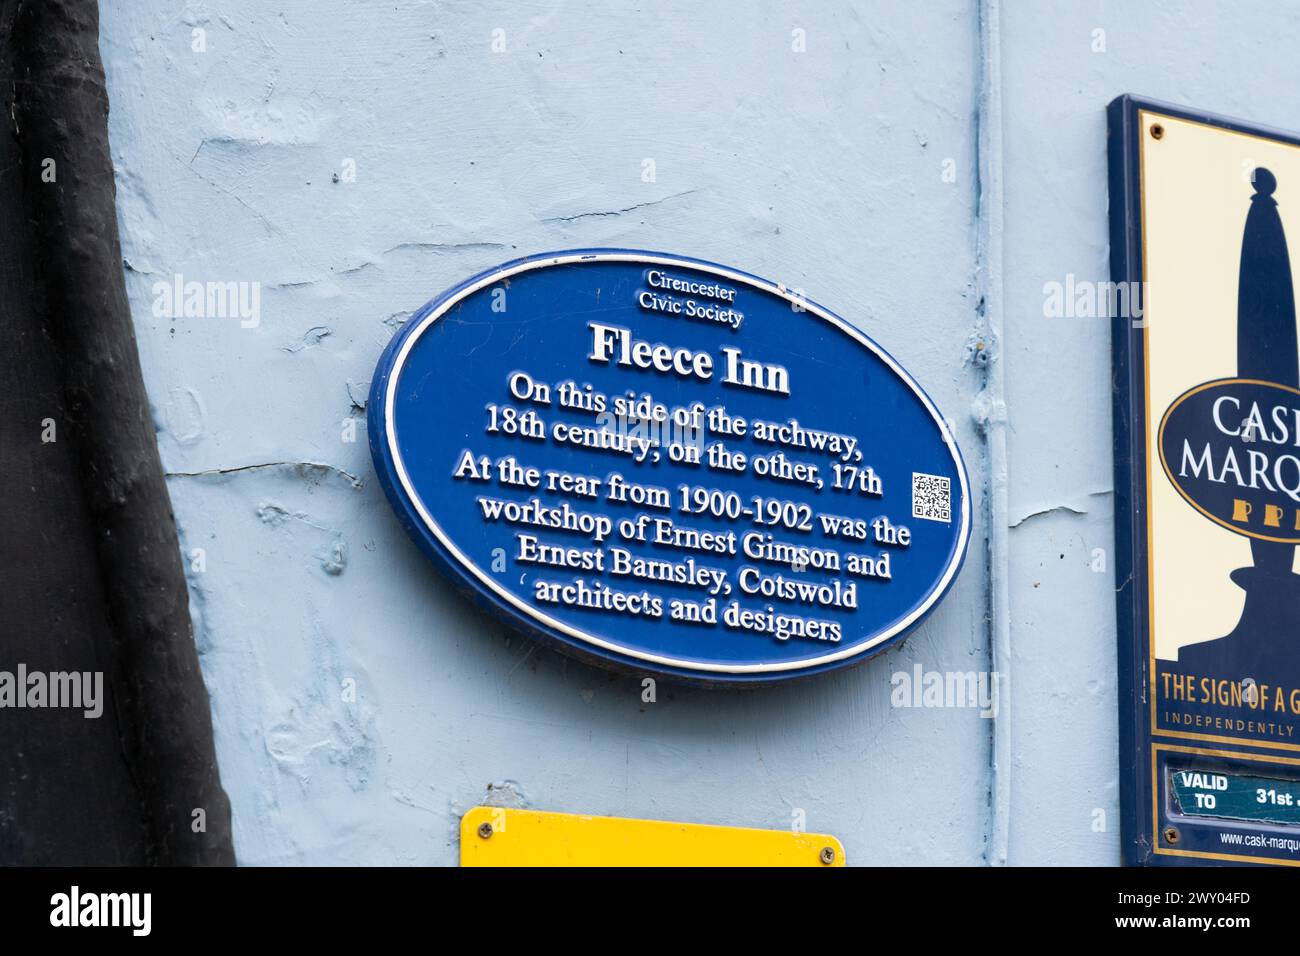 A Cirencester Civic Society plaque on the Fleece Inn stating that one side of the building is 17th Century, the other 18th century. Cirencester, UK Stock Photo